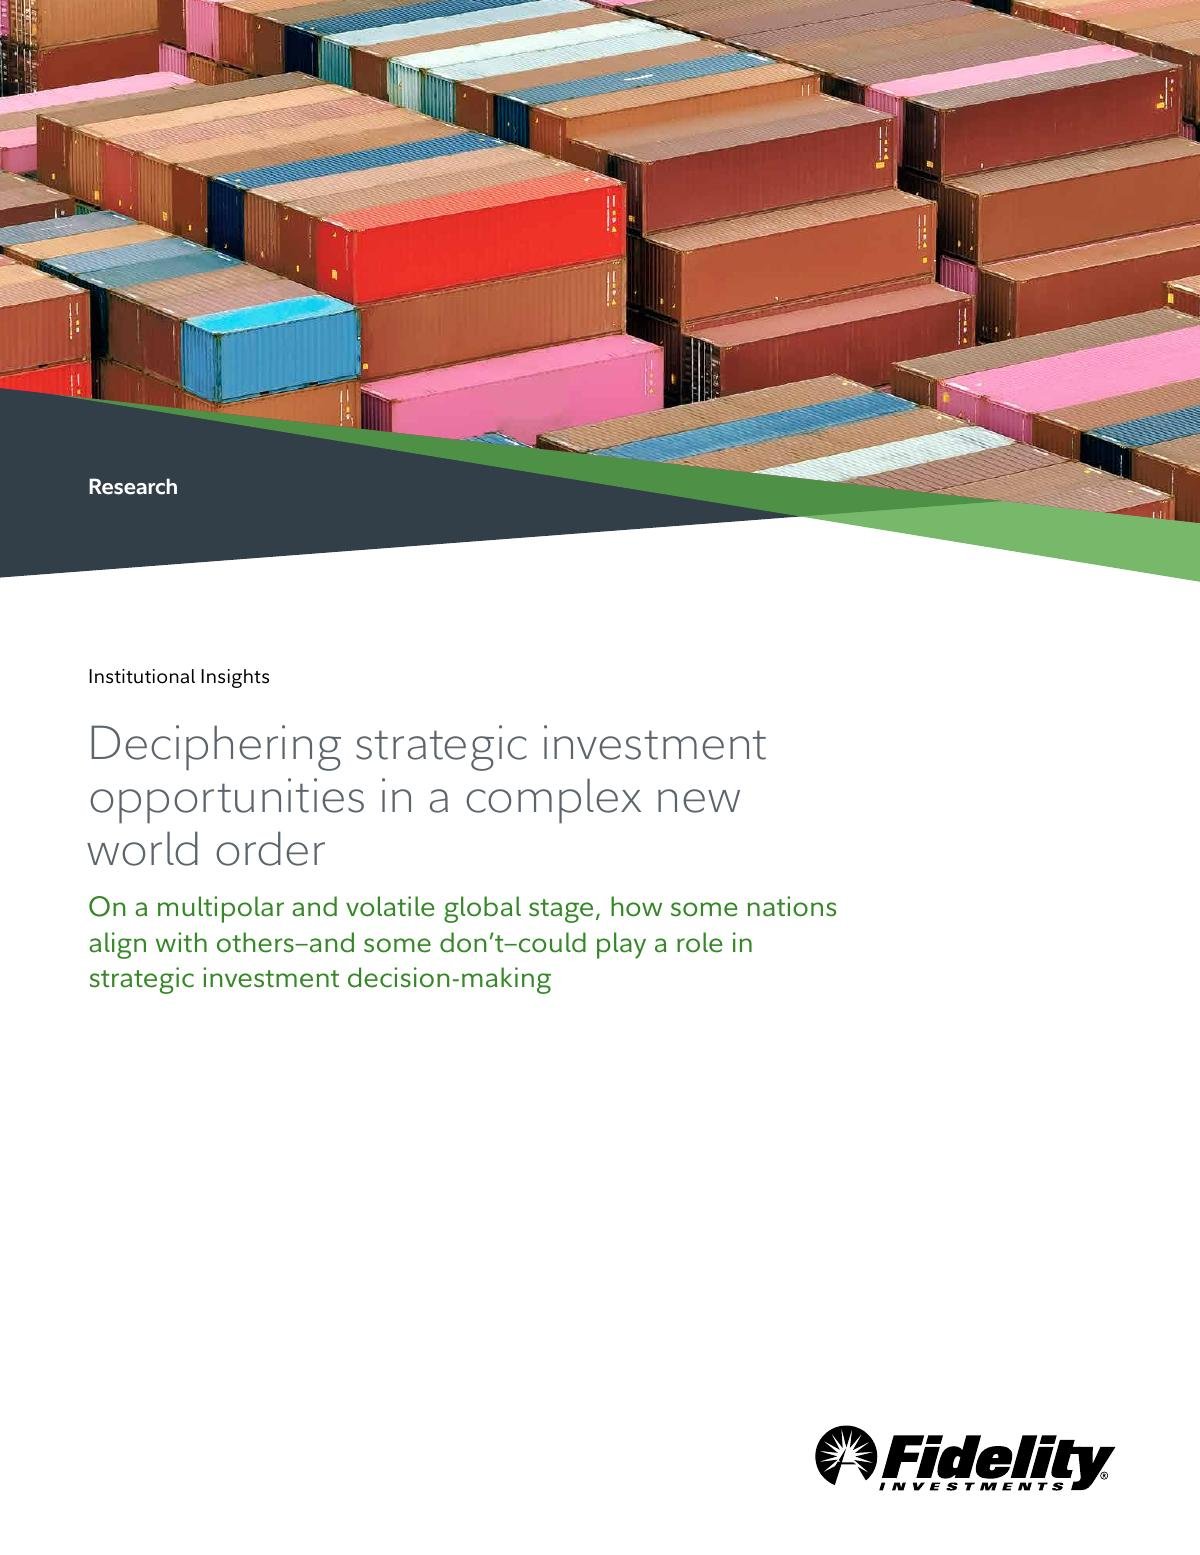  Deciphering Strategic Investment Opportunities in a Complex New World Order